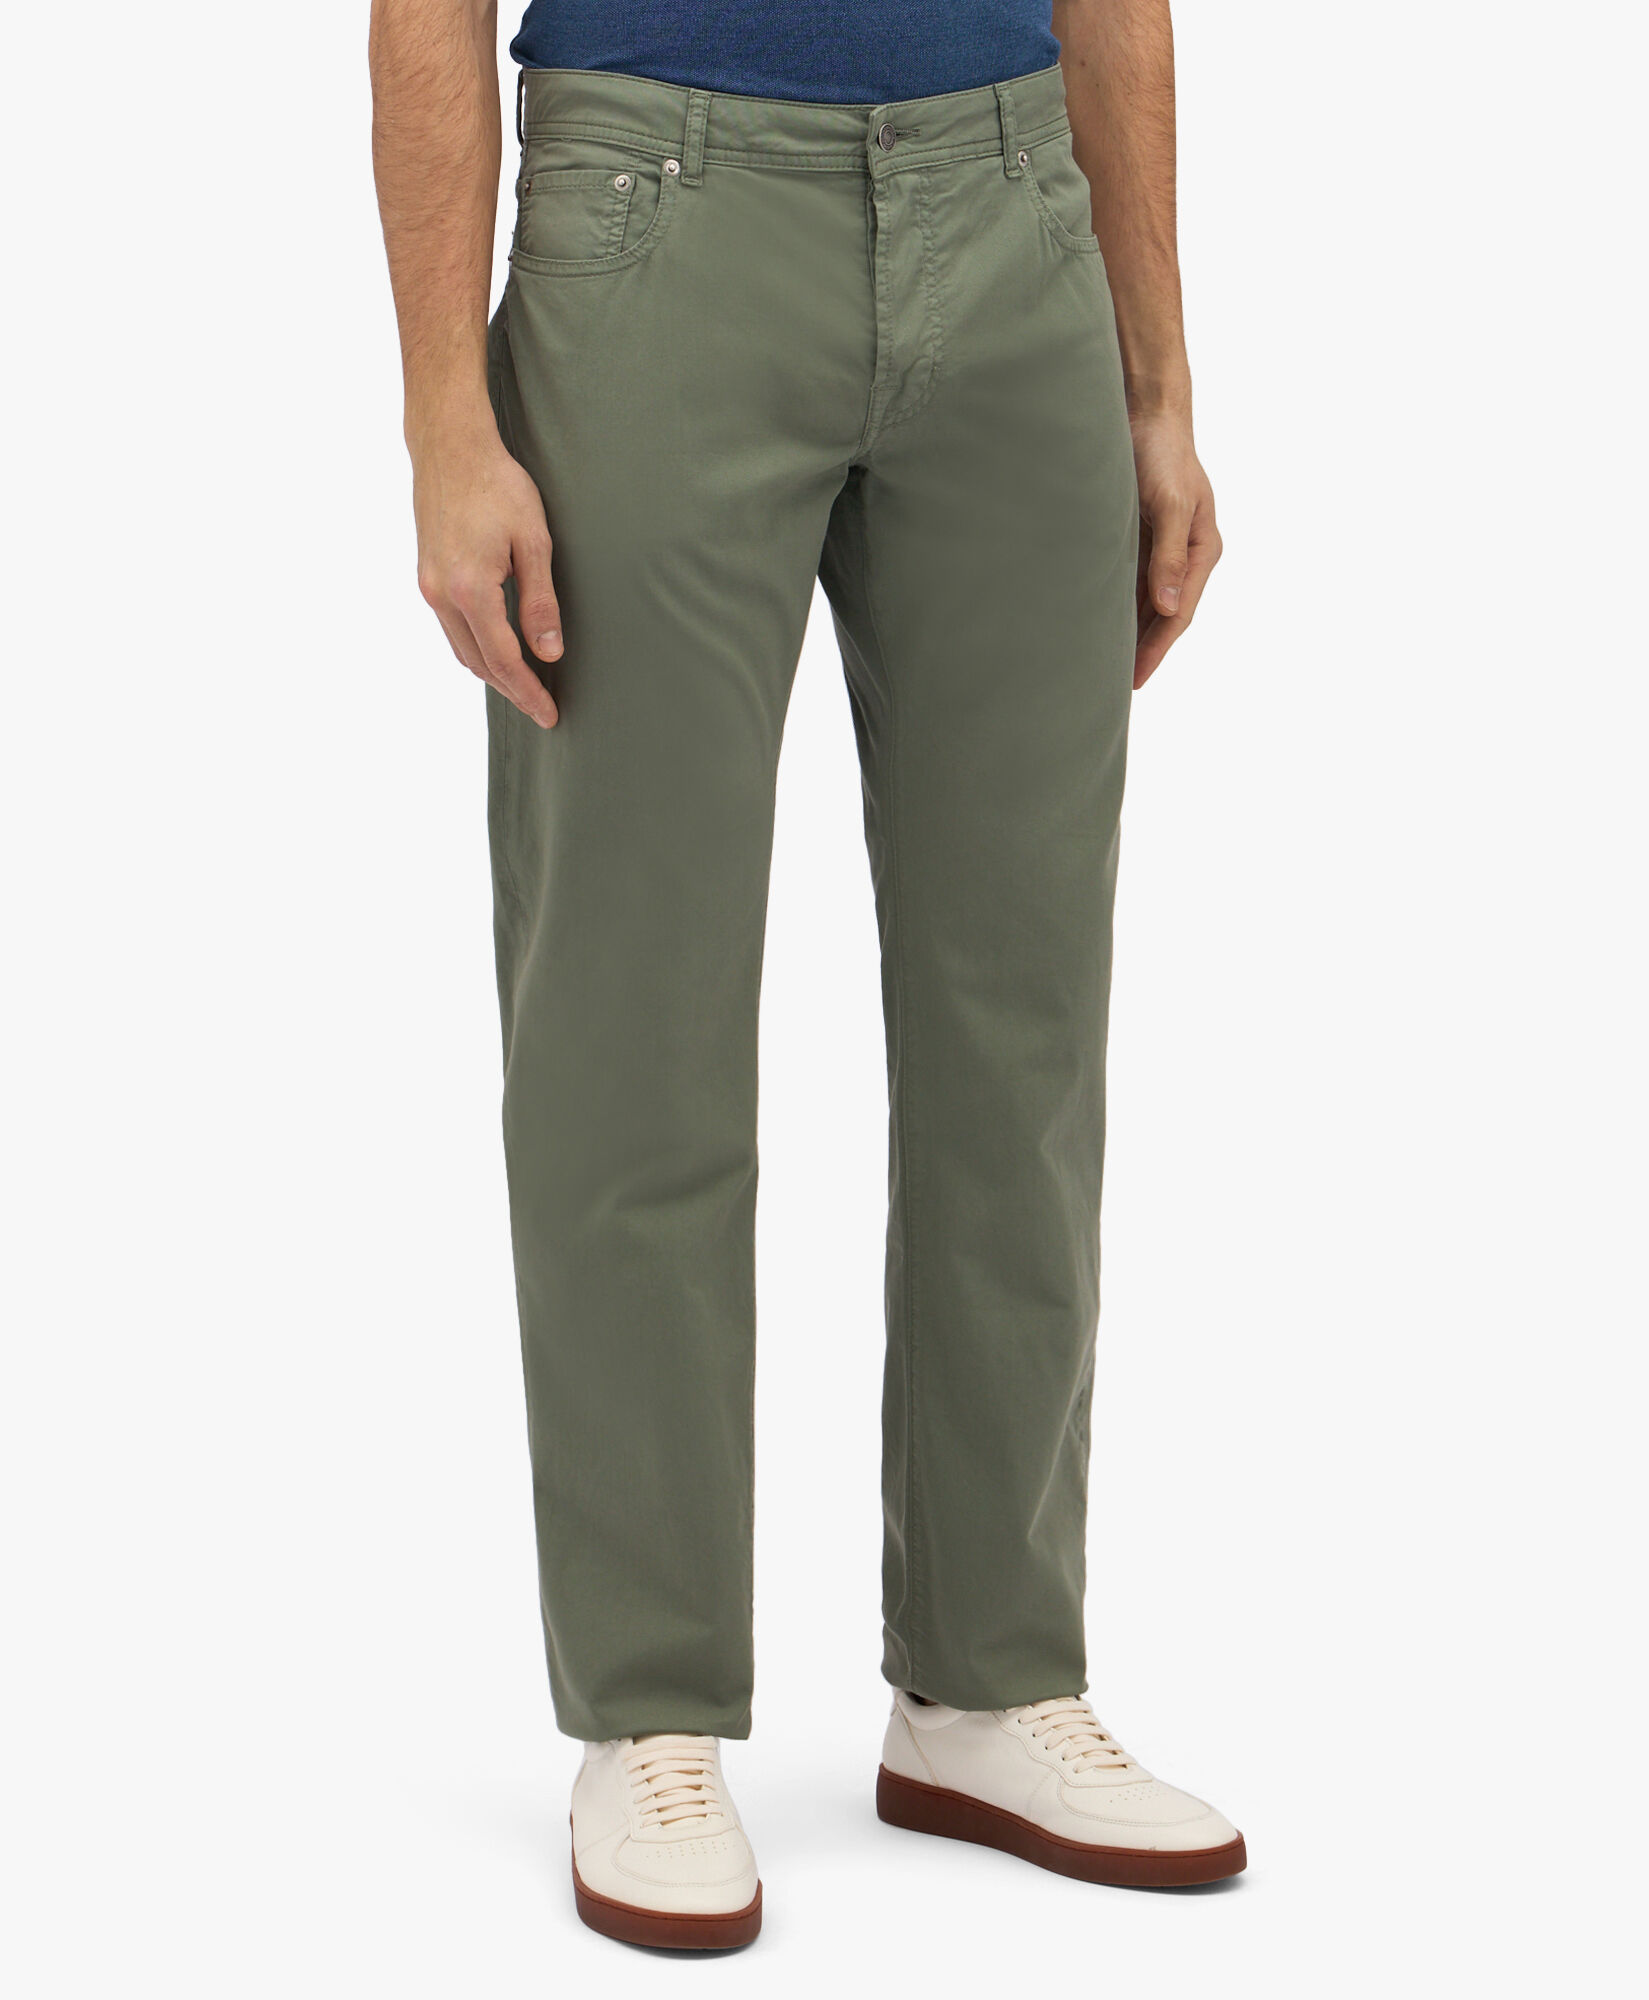 Men's Casual Trousers: Chinos, Khakis & Jeans | Brooks Brothers®